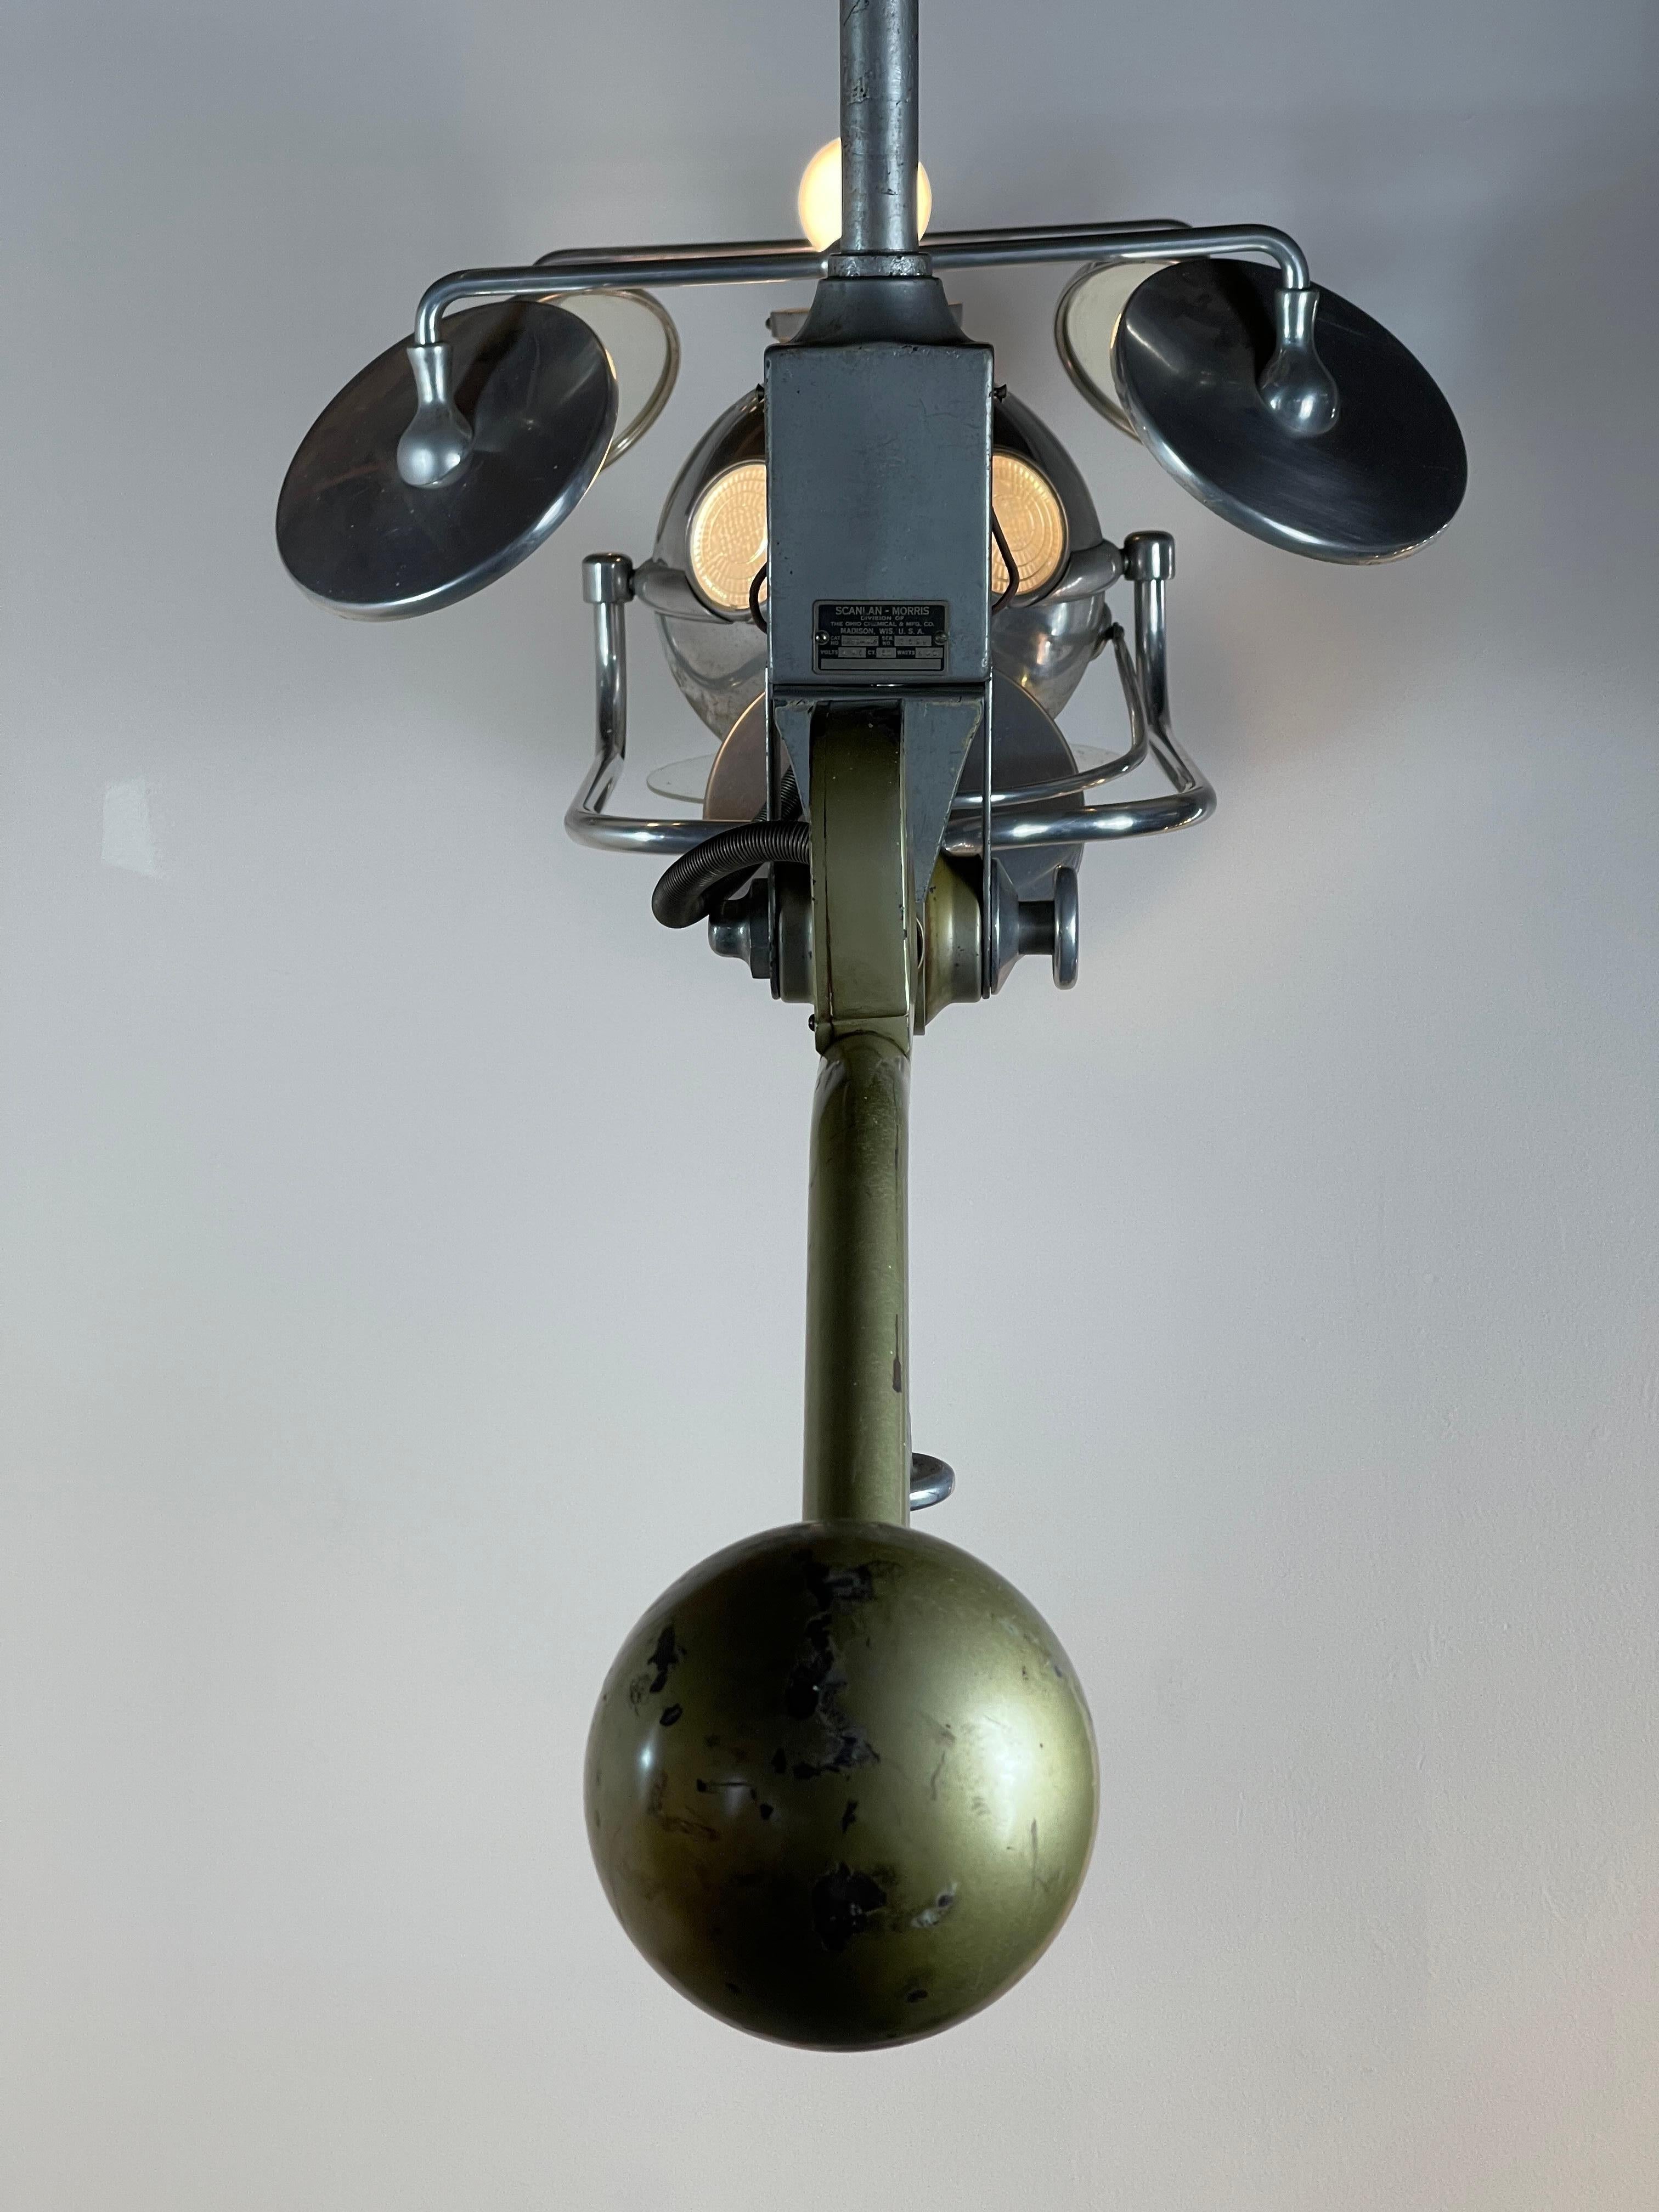 Glass Monumental Antique Industrial Operay Multibeam Surgical Lamp For Sale